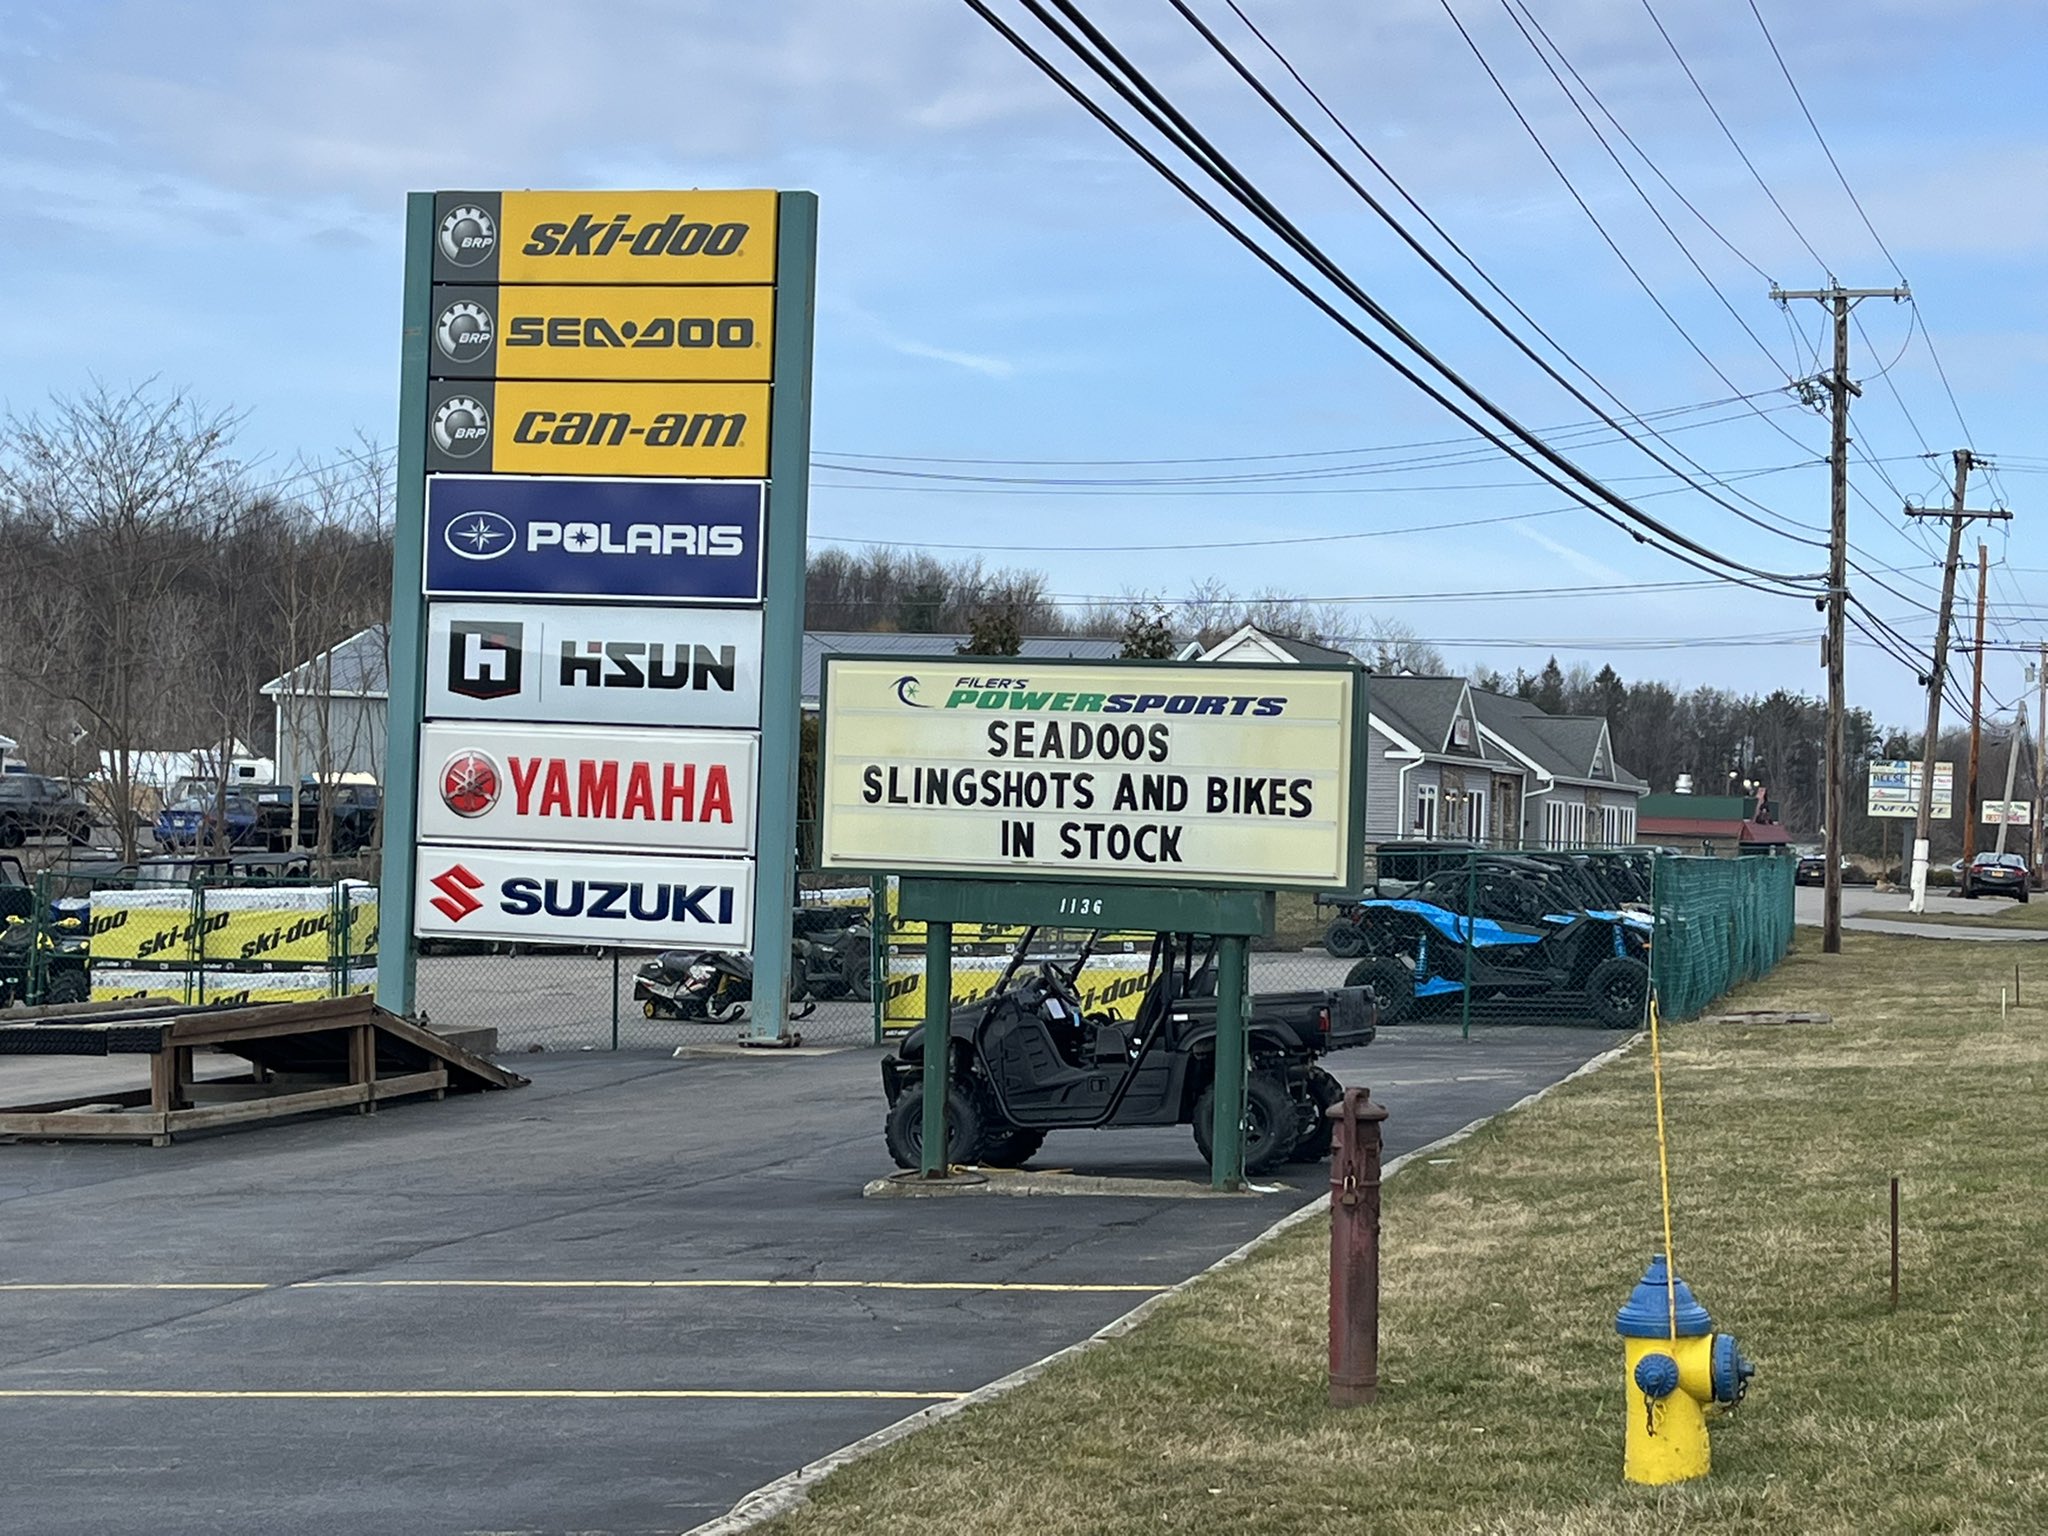 Investigation continues into smash-and-grab at Macedon dealership: $80K+ in damage, stolen property